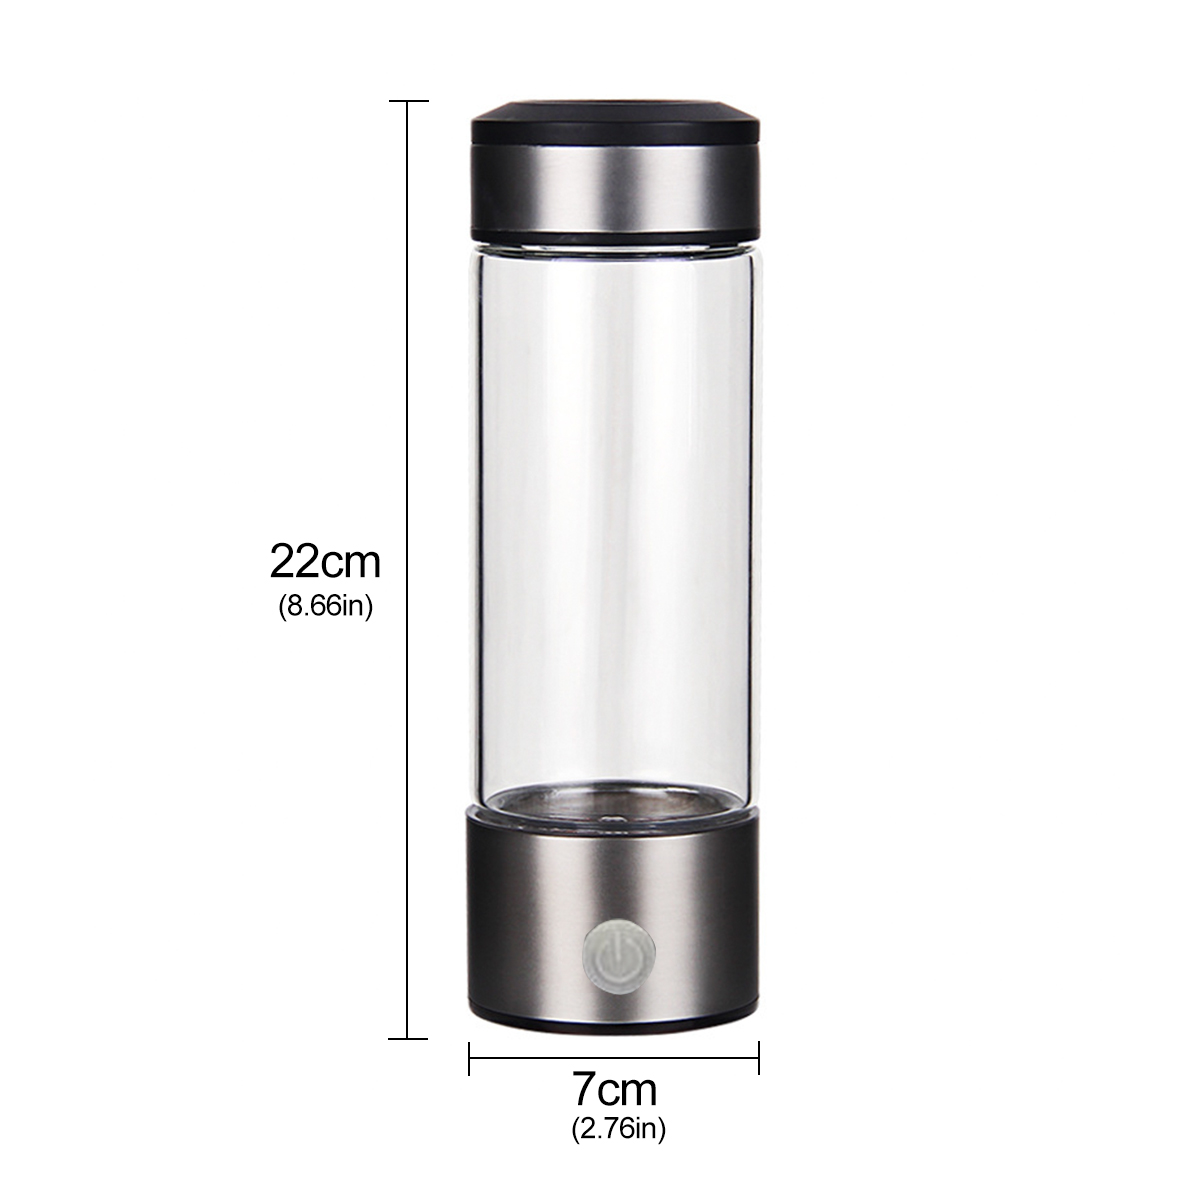 400ml-Water-Filter-Bottle-Hydrogen-Generator-Water-Cup-Reusable-Smart-3-Minutes-Electrolys-Water-Pur-1731189-2